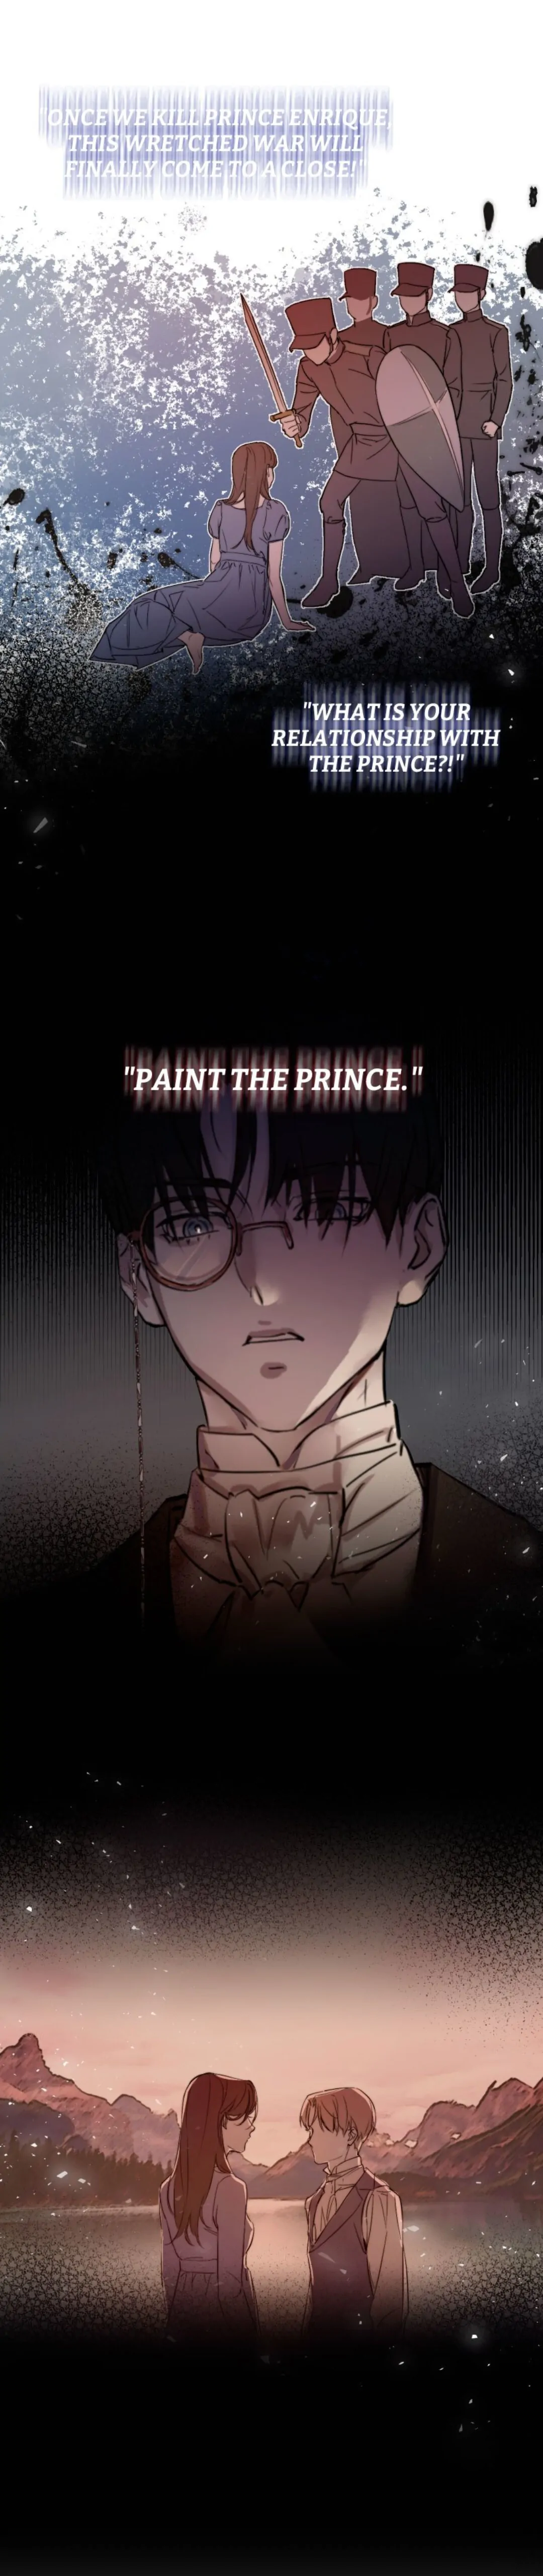 The Portrait of the Late Prince chapter 1